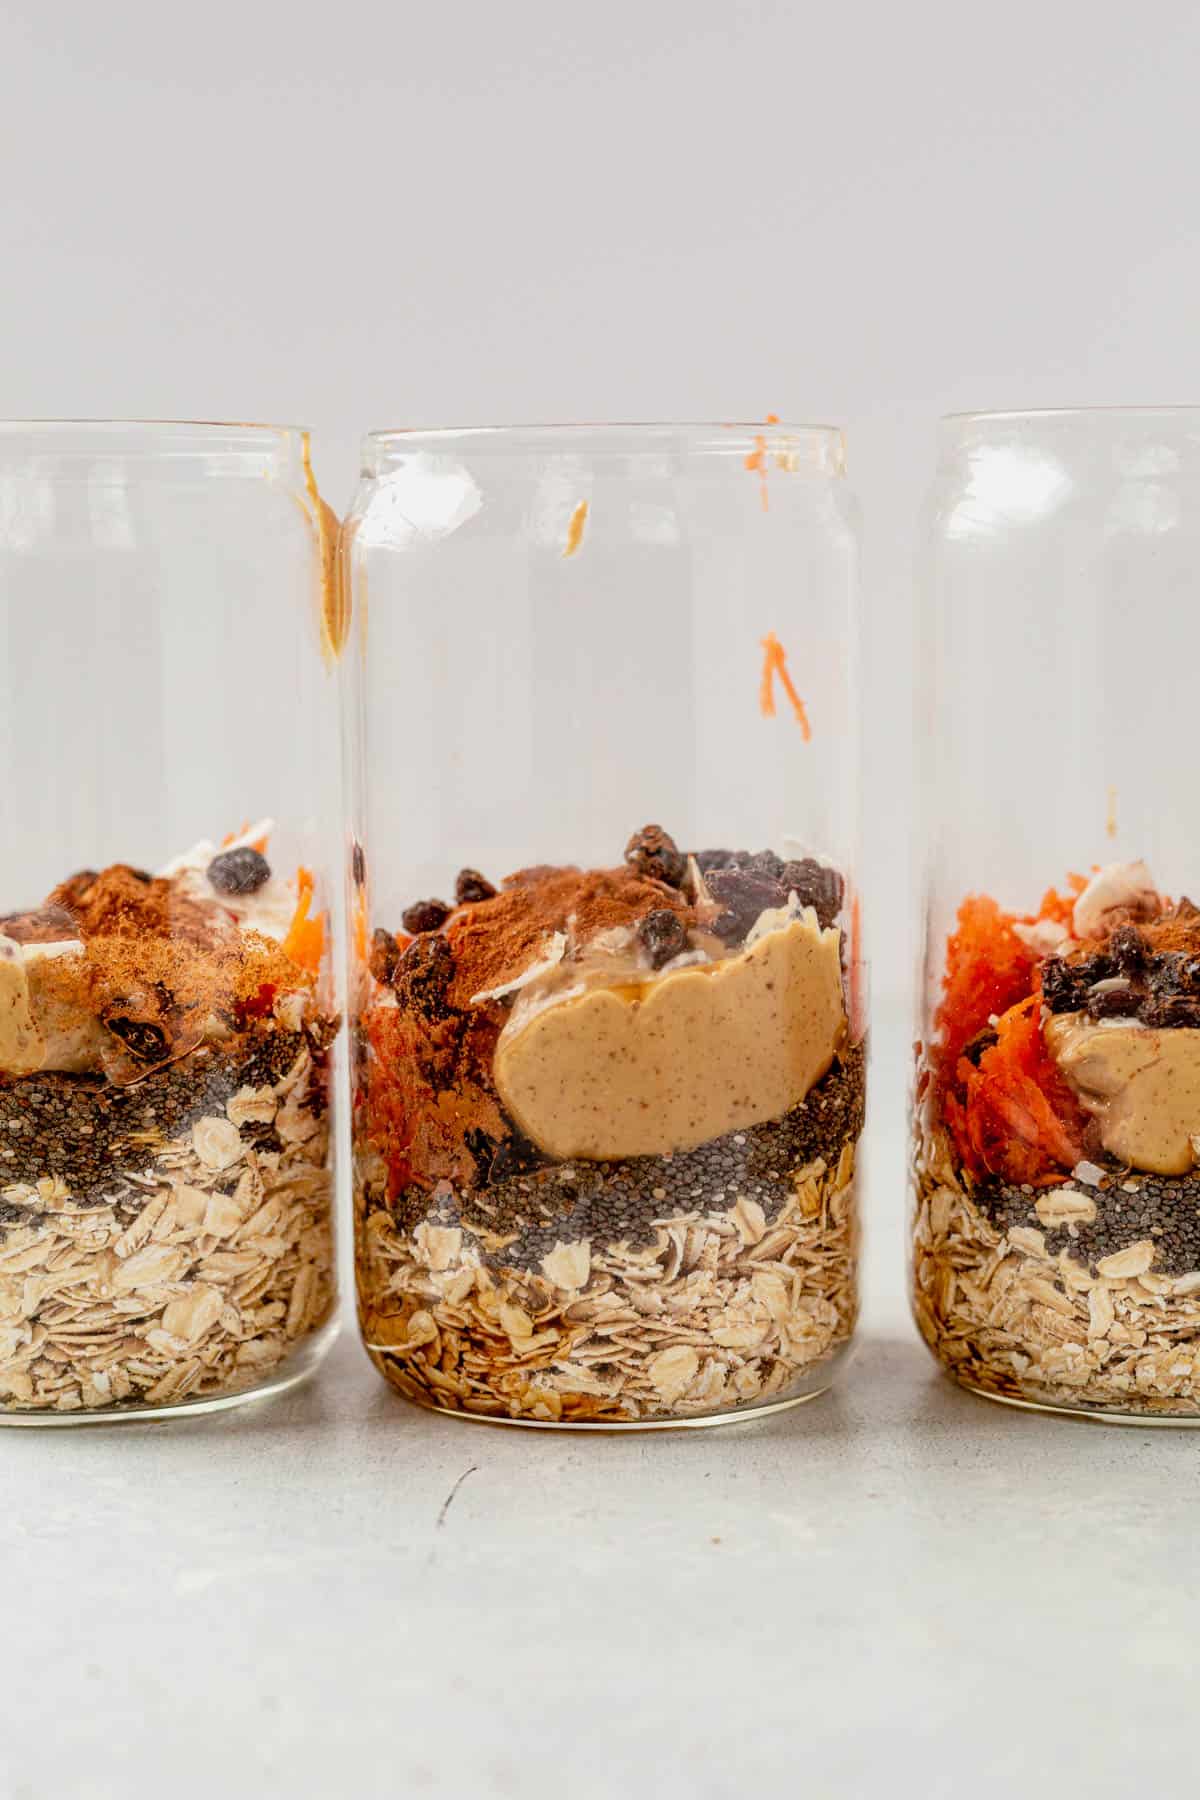 oats, carrots, almond butter, raisins, and spices in glass jars